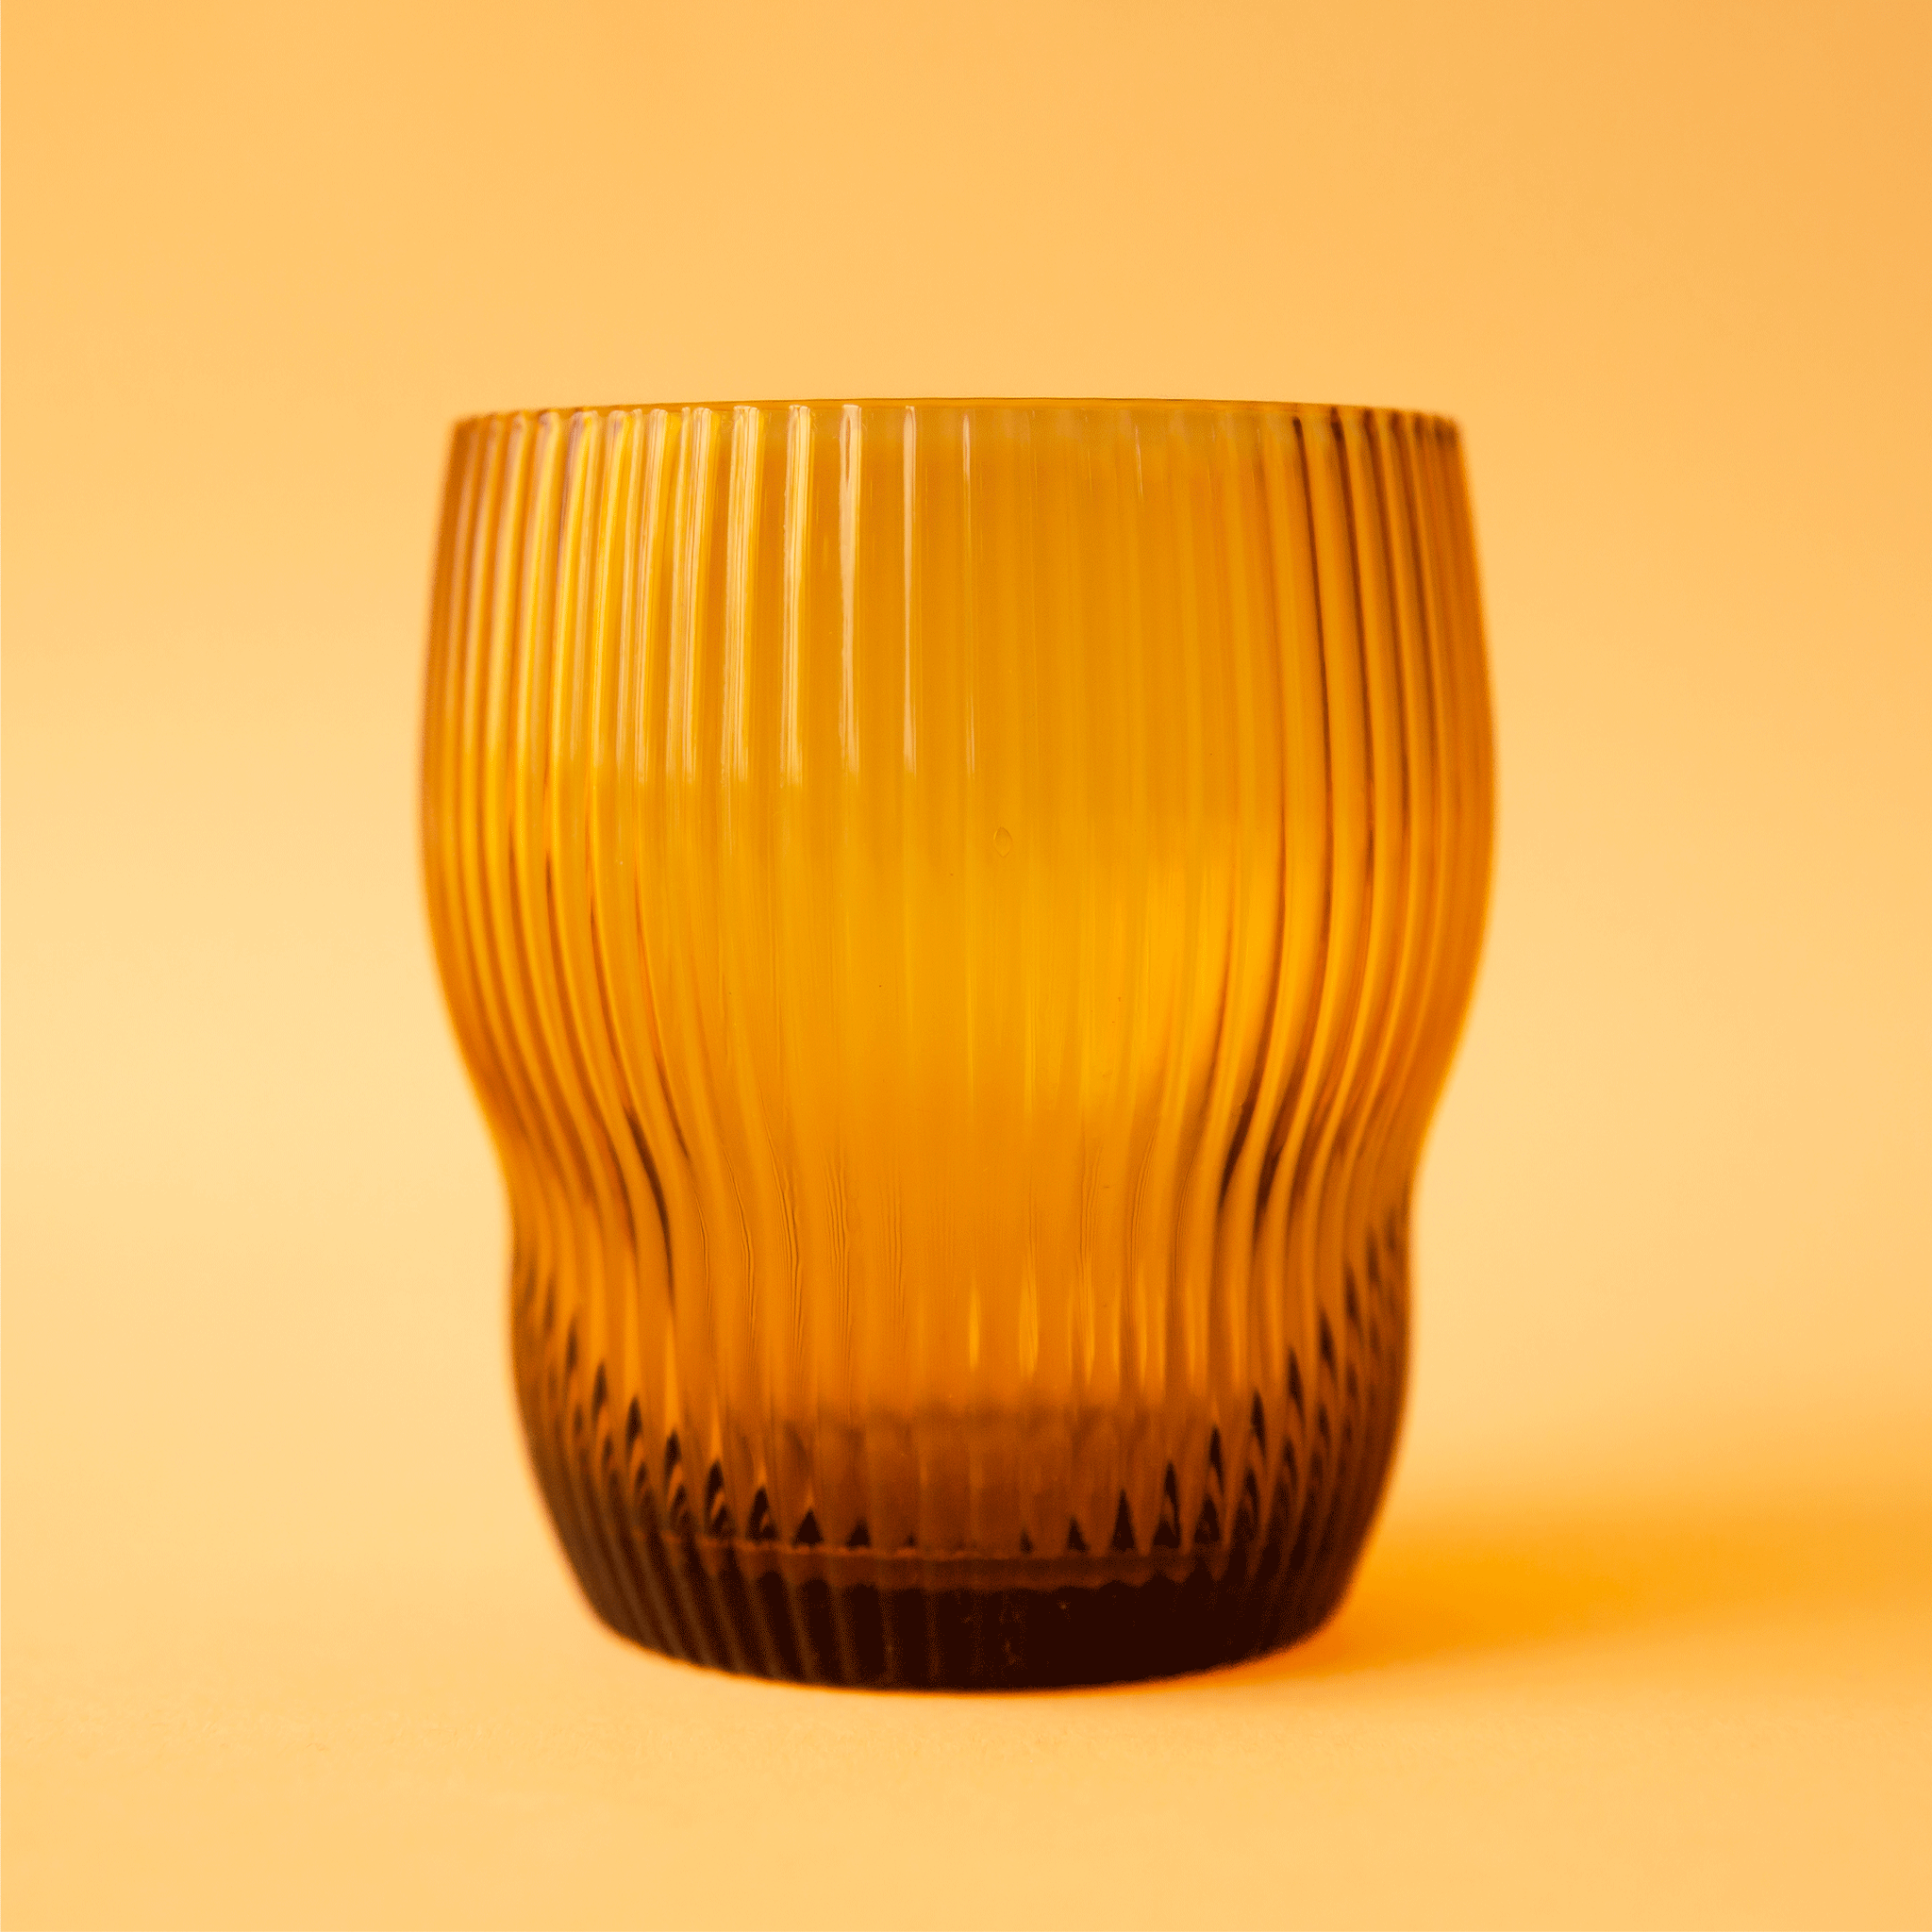 On a orange background is a fluted drinking glass in an amber color. 